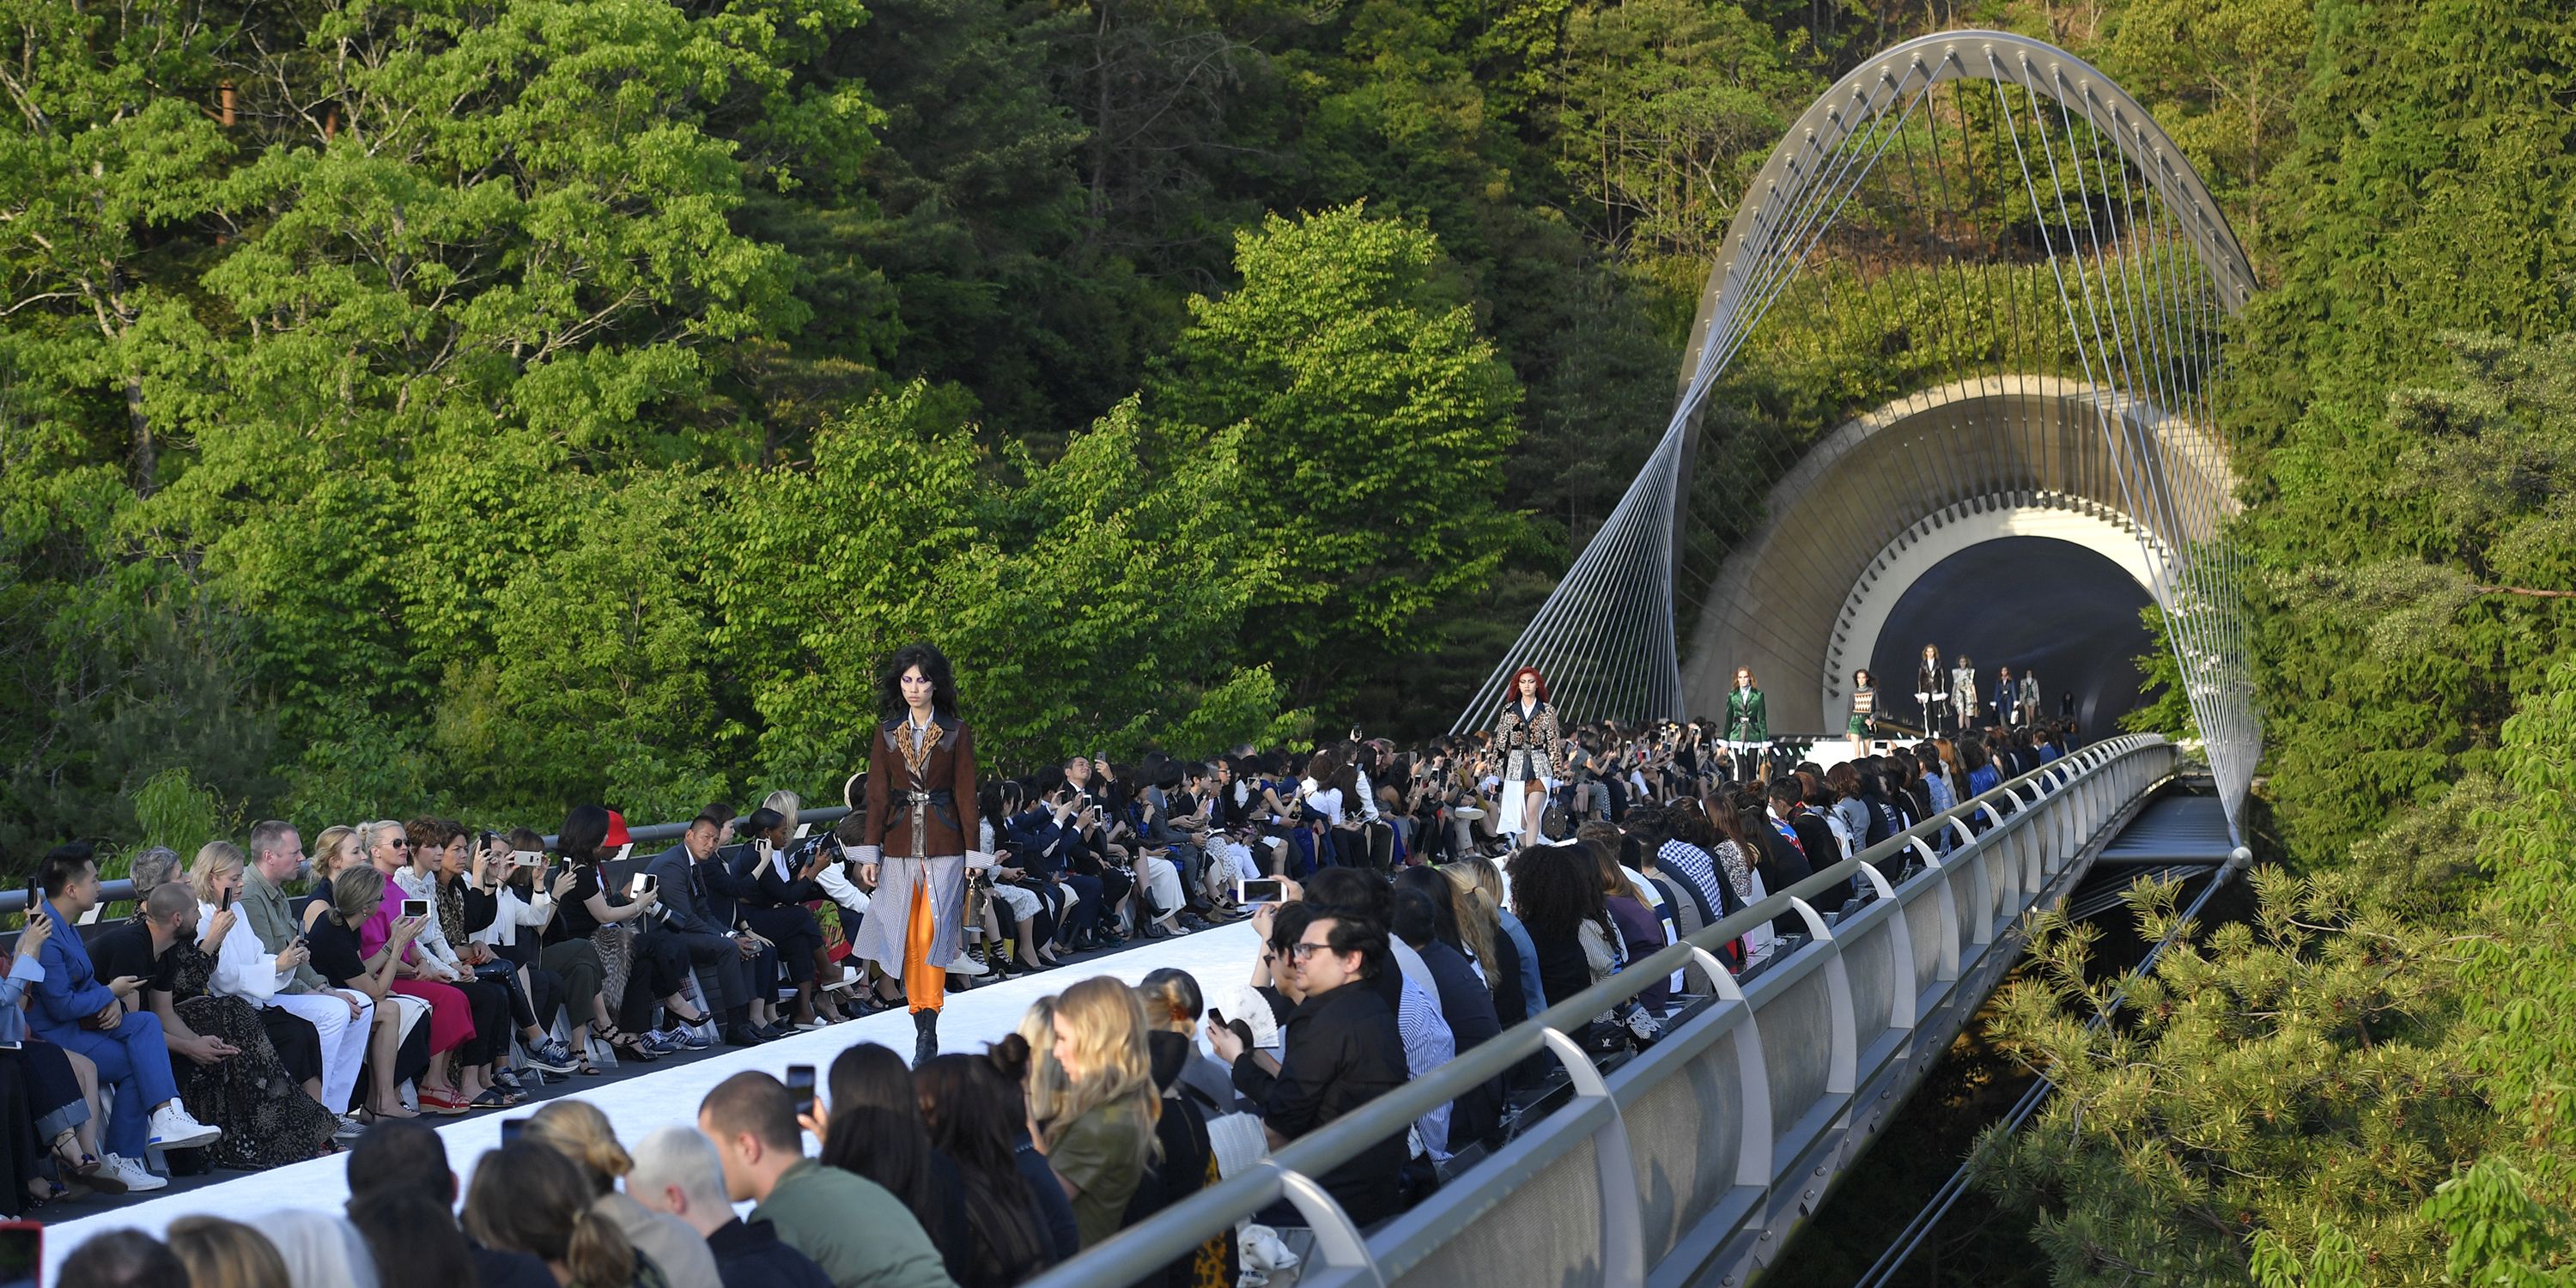 Louis Vuitton visits Kyoto for 2018 Cruise Collection - LVMH